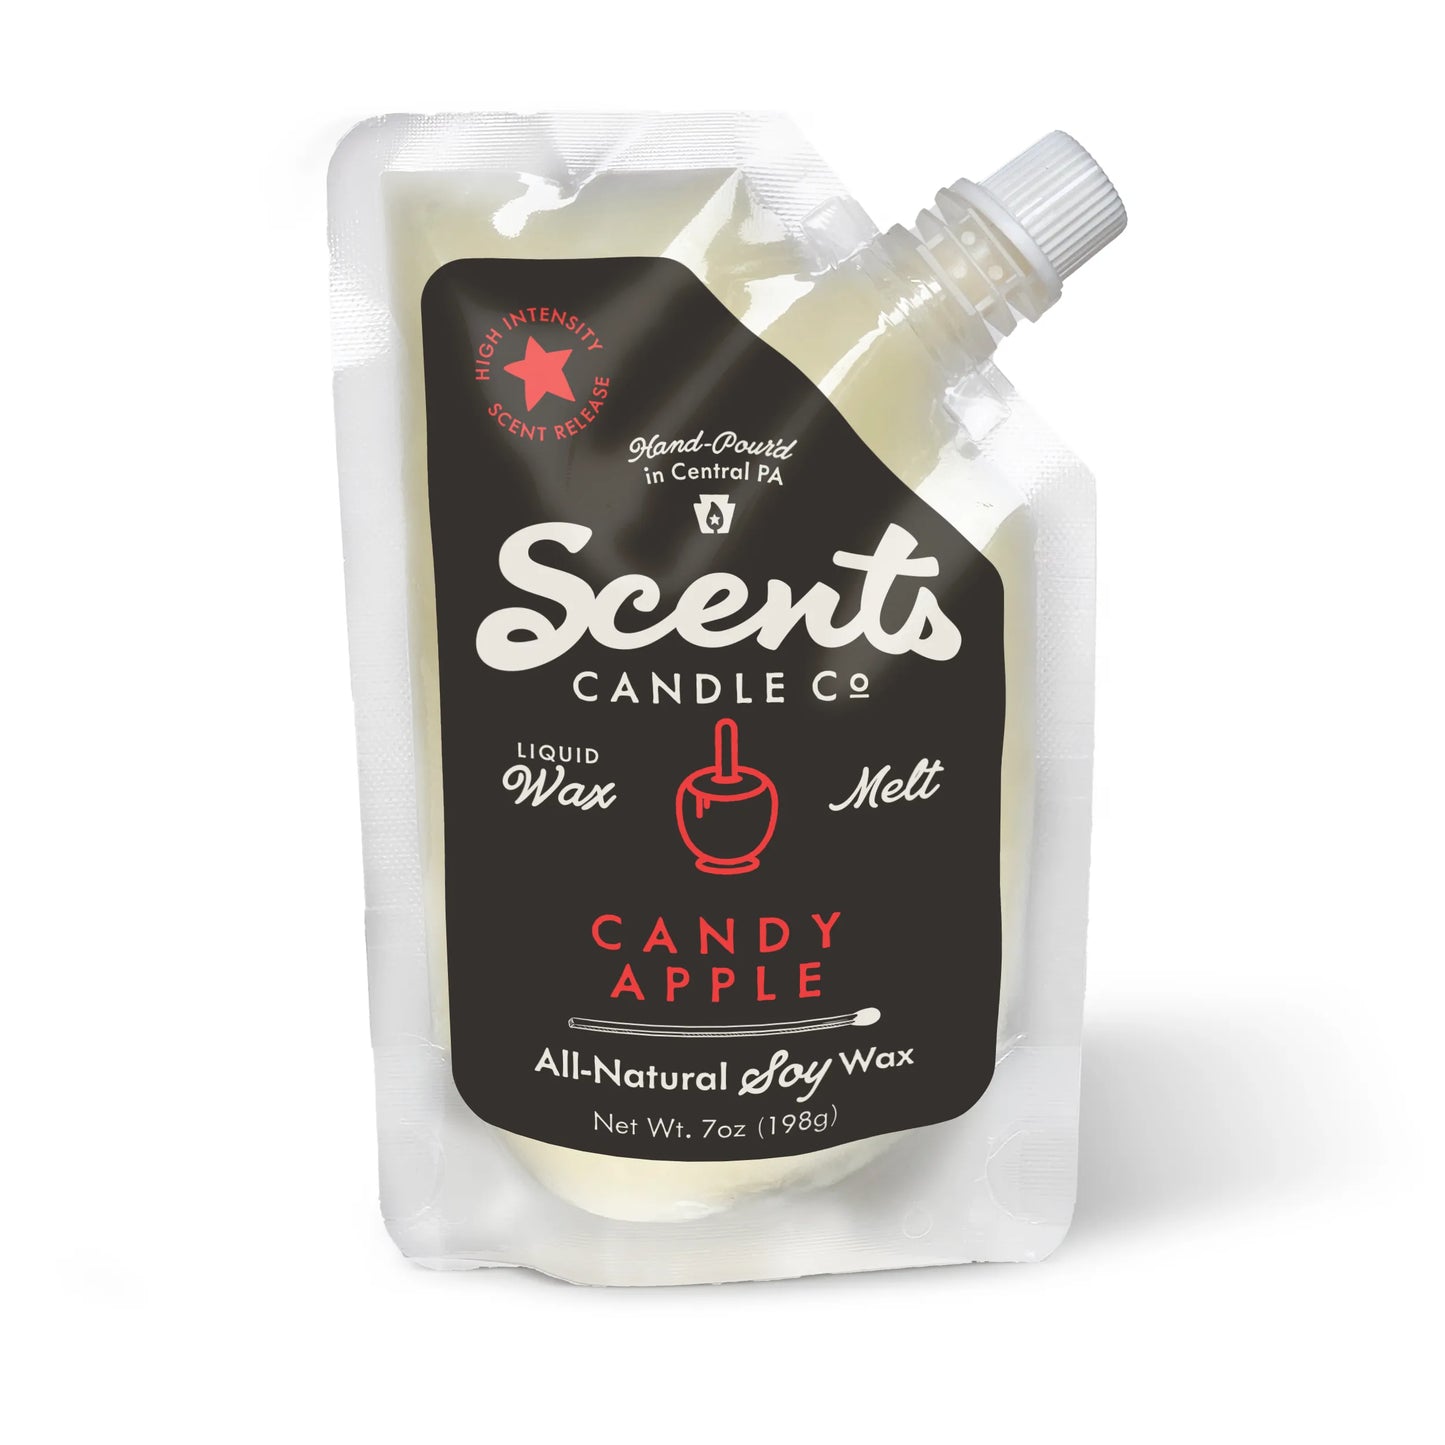 Scents Candle Co. Candy Apple Liquid Wax Melt